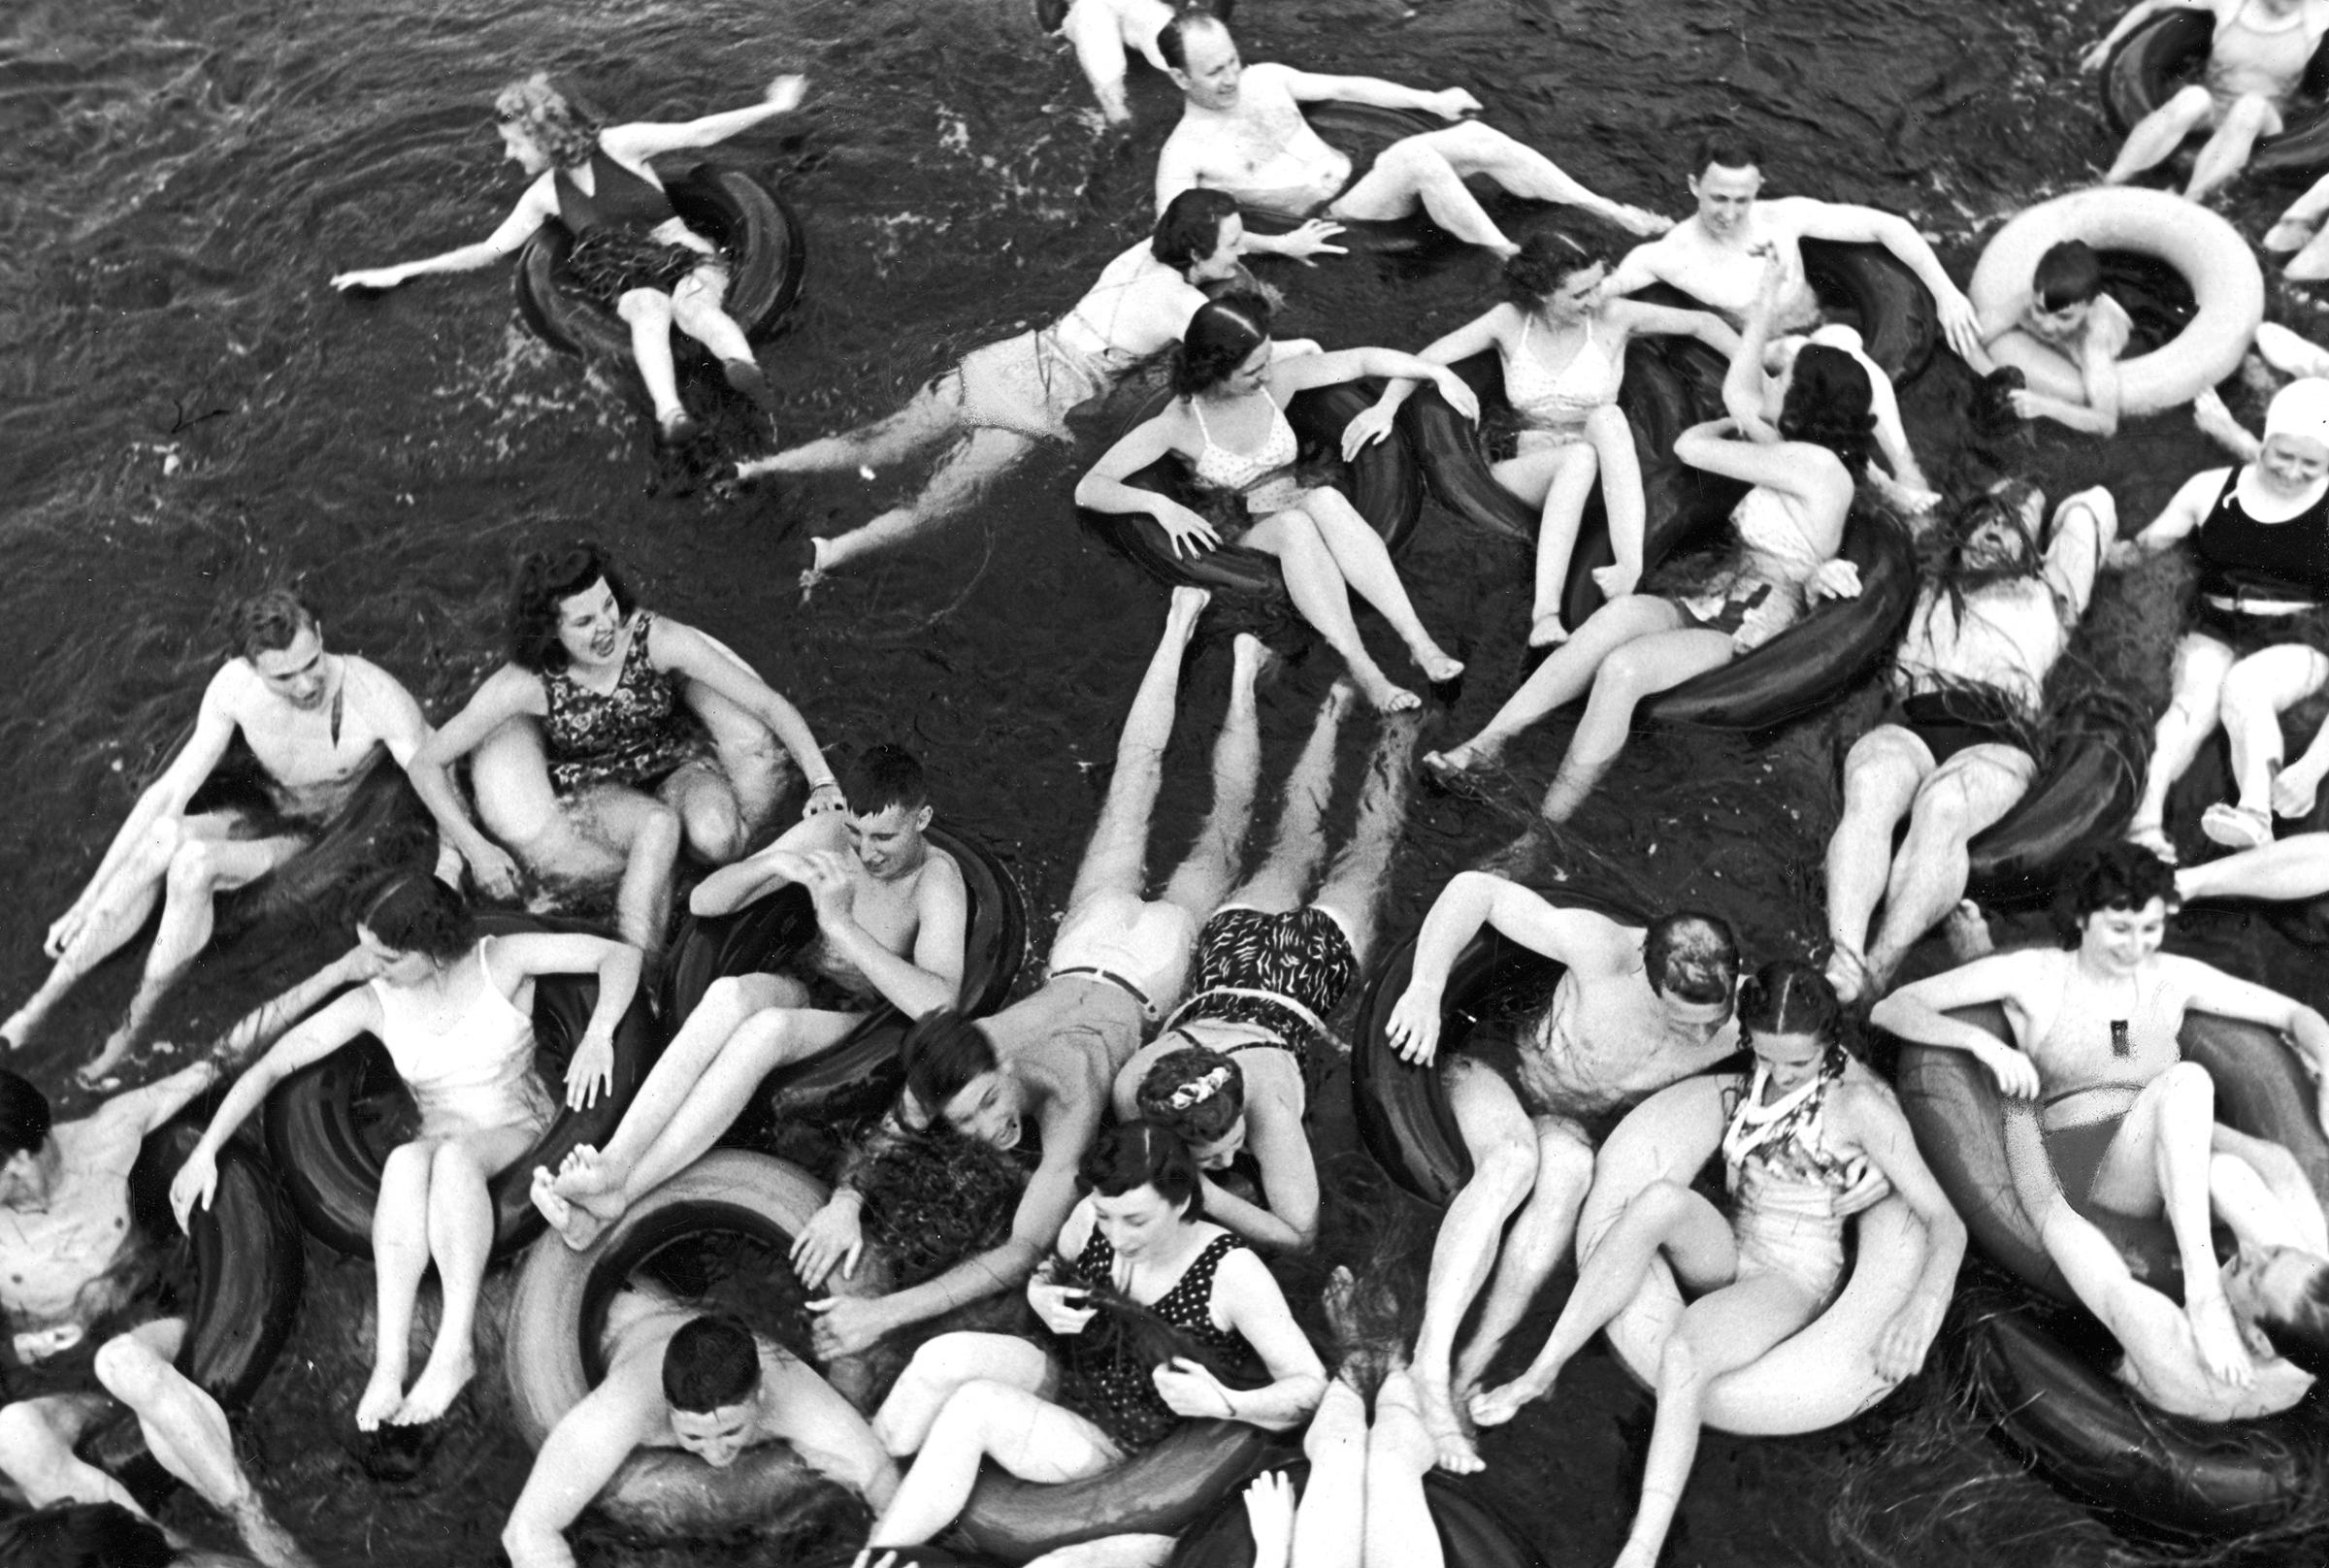 A floating party on the Apple River in Somerset, Wisconsin in 1941.